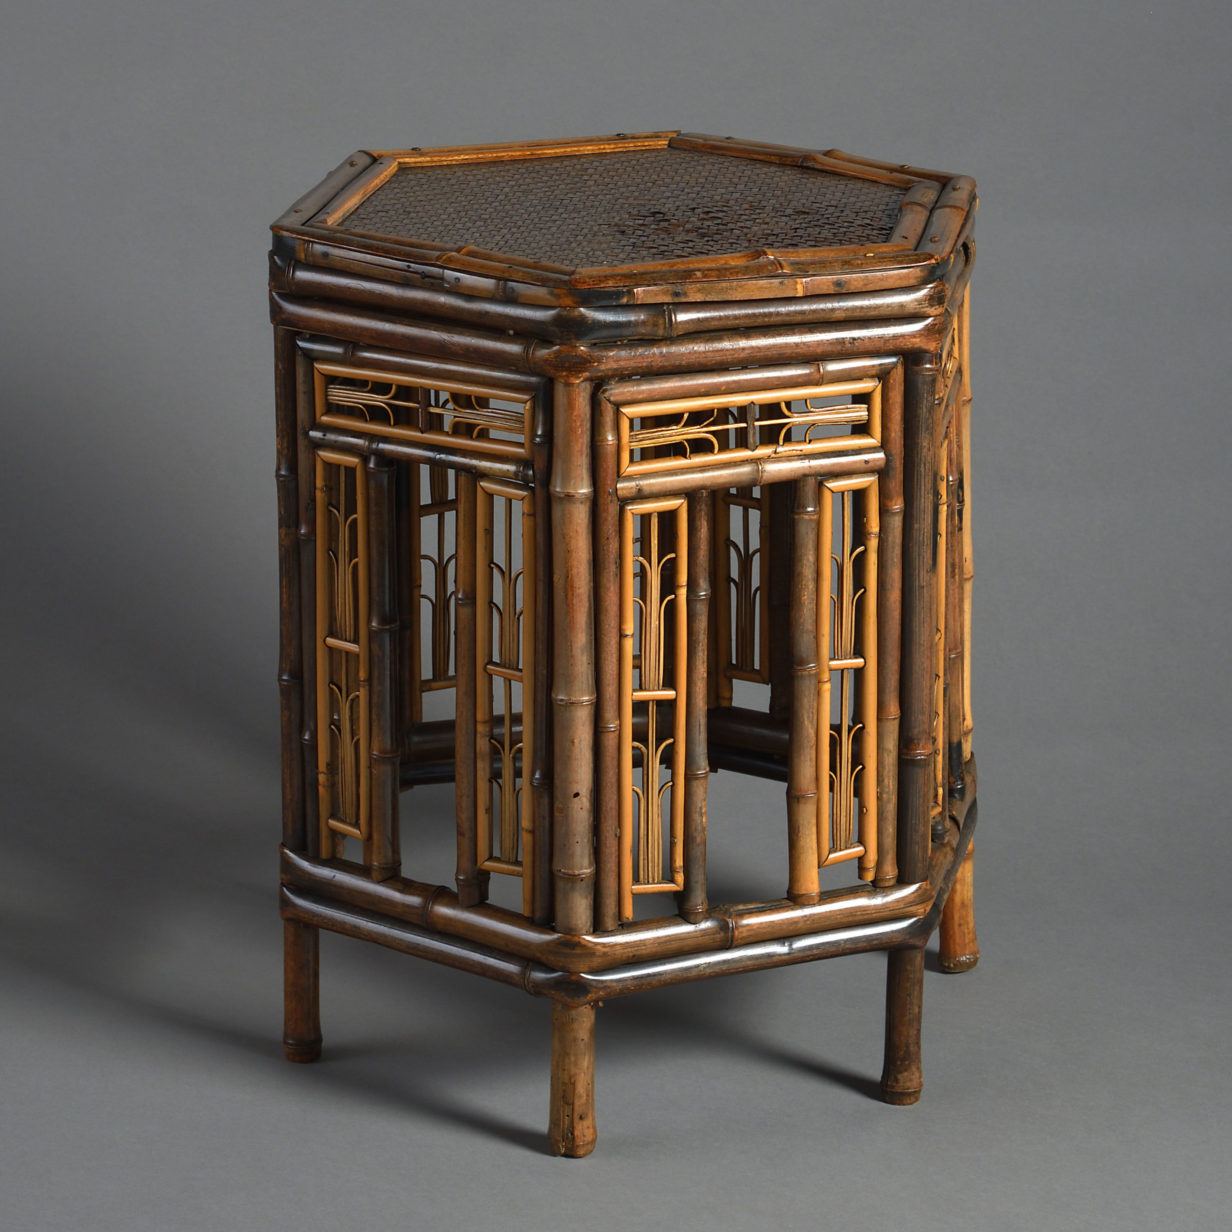 A 19th century regency period brighton pavilion bamboo table